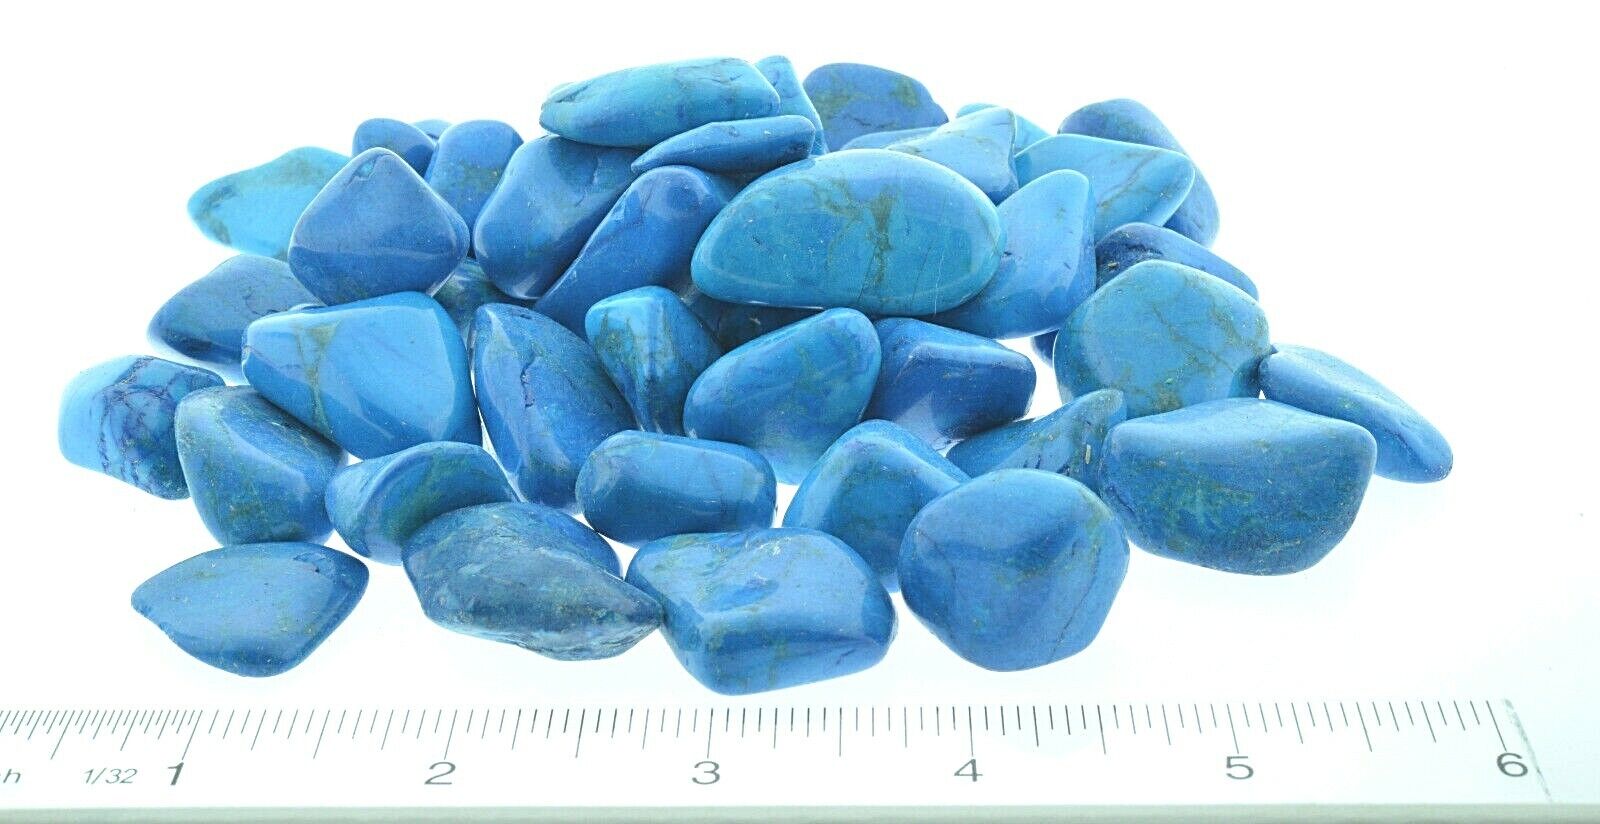 3X Blue Howlite Dyed 20-30mm LG Healing Crystal Tumbled Stones Insomnia Patience